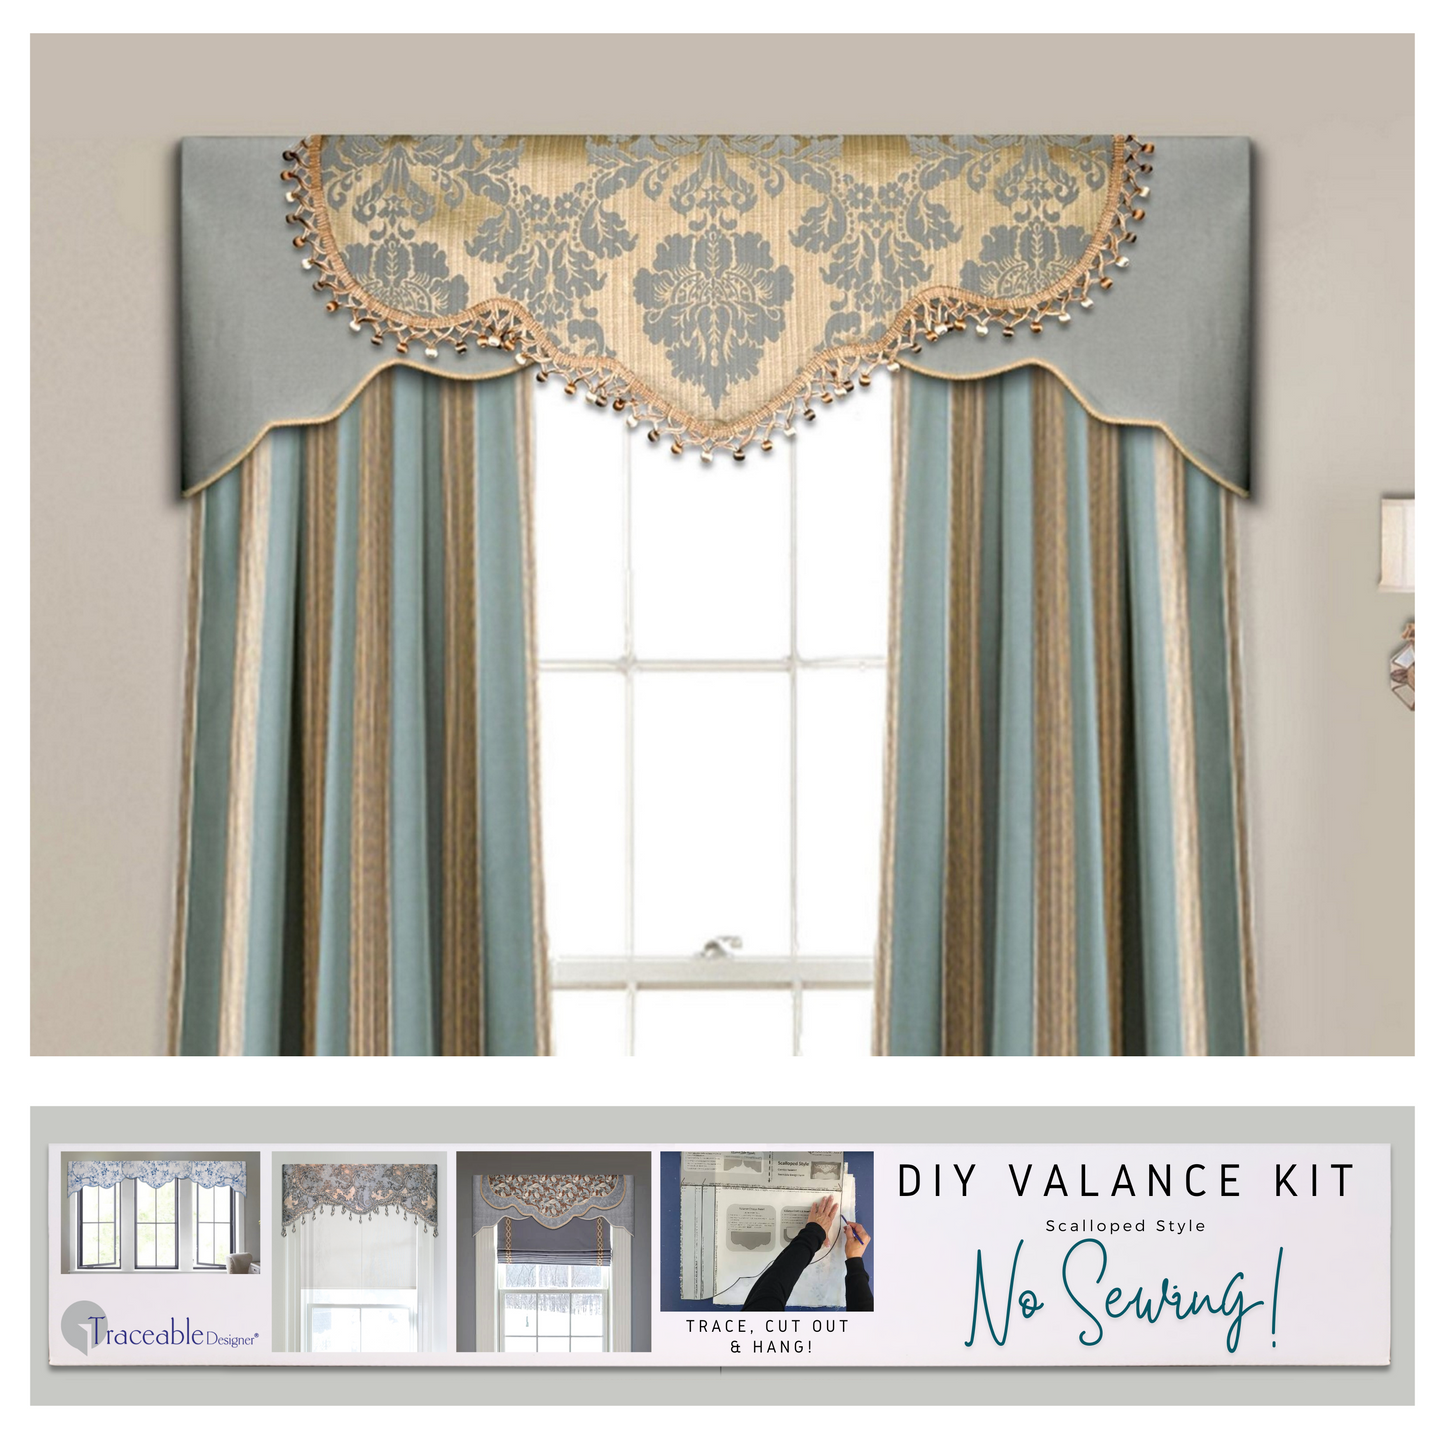 Scalloped Valance Kit for Bedroom, Kitchen, Living Room, No-Sewing